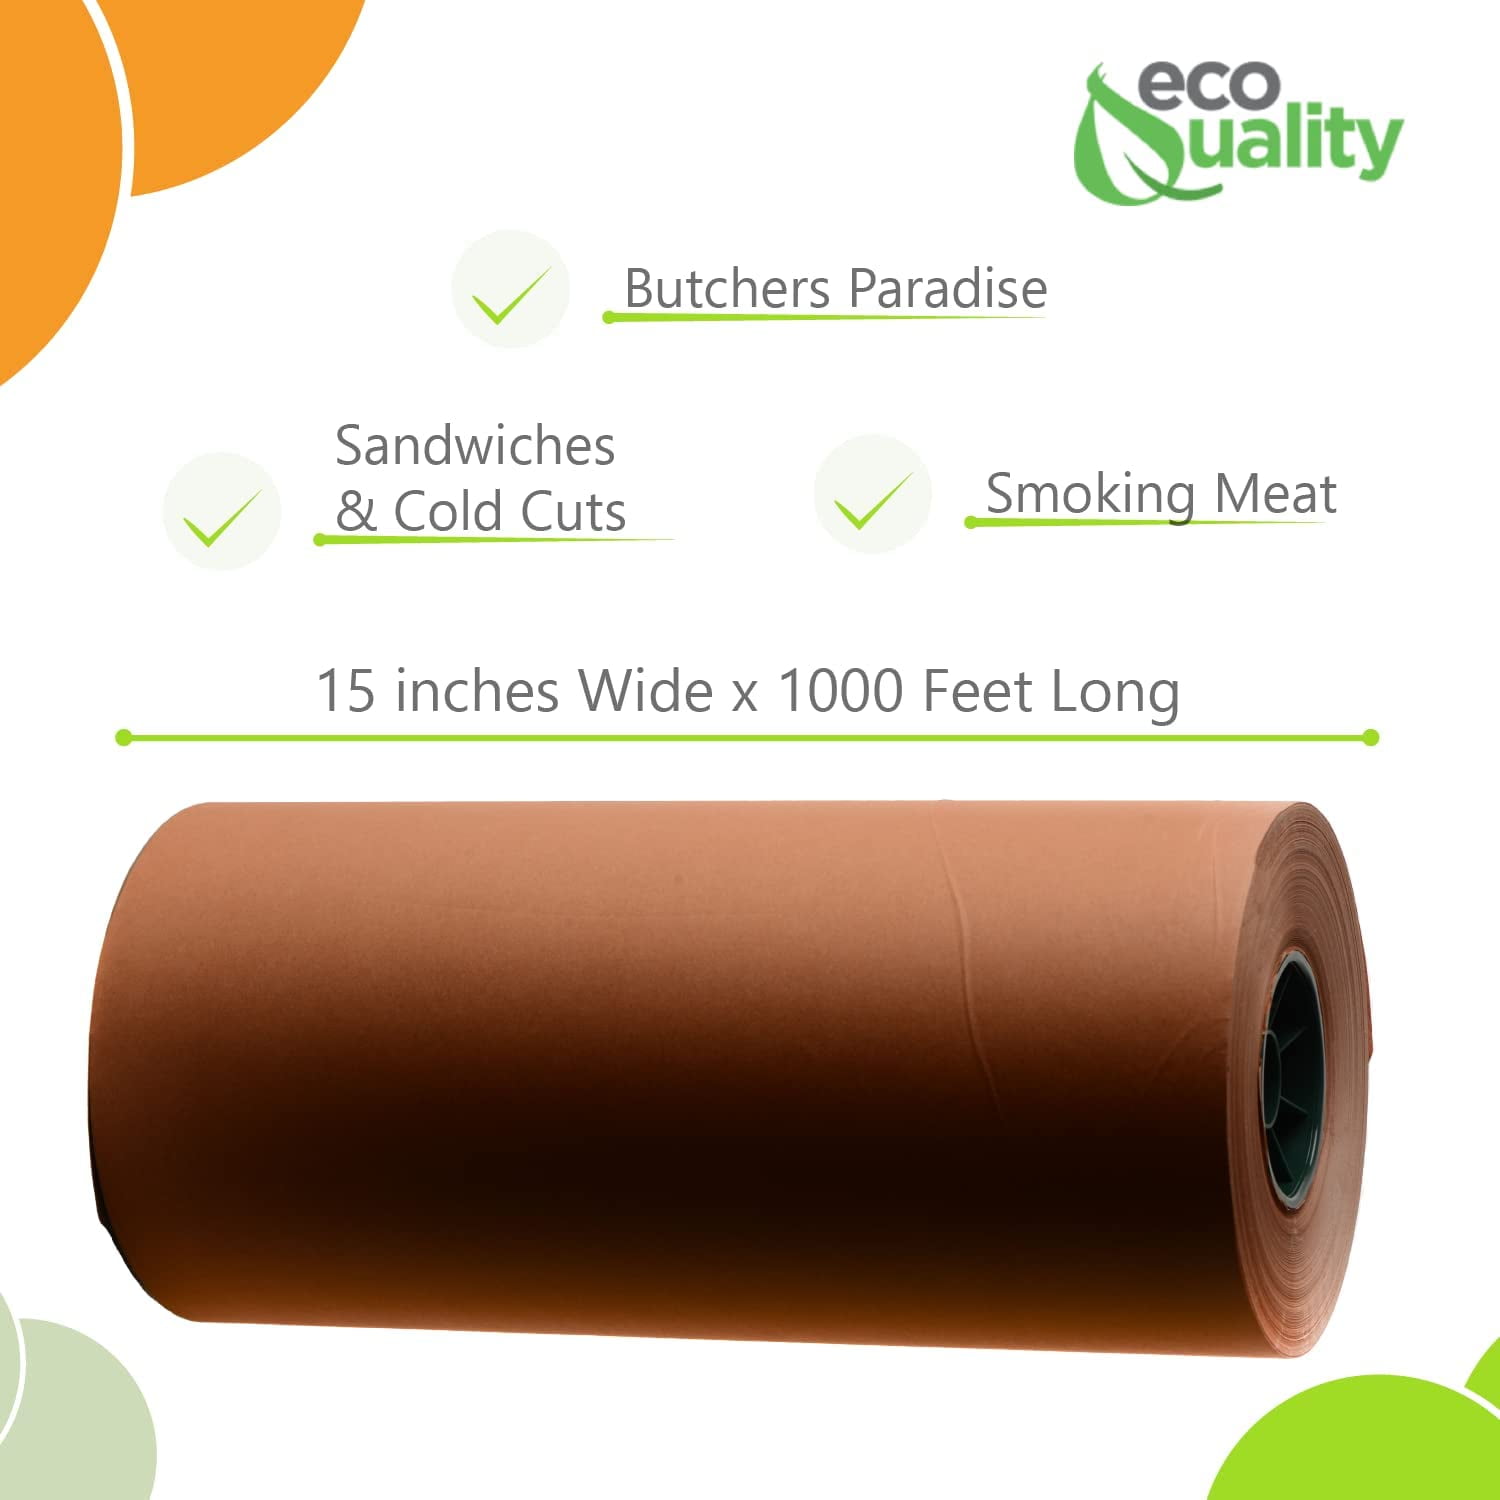 Bryco Goods Butcher Paper Roll - Peach Butcher Paper for Smoking Meat - Ideal for Smoking Meat - Unbleached Unwaxed Uncoated Kraft Paper - Butchers